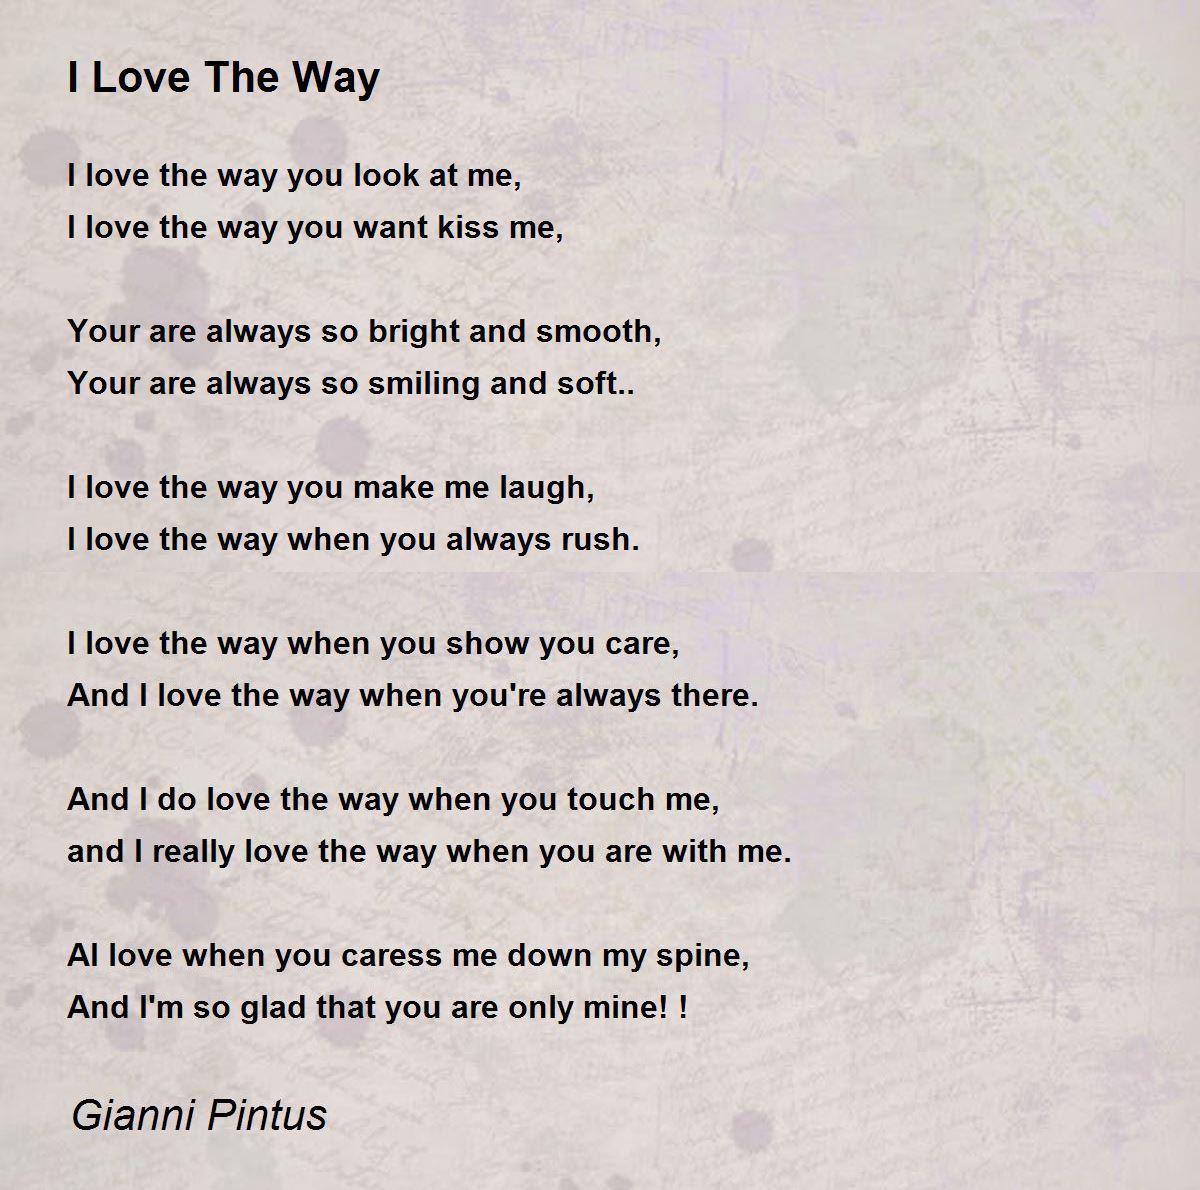 I Love The Way I Love The Way Poem by Gianni Pintus